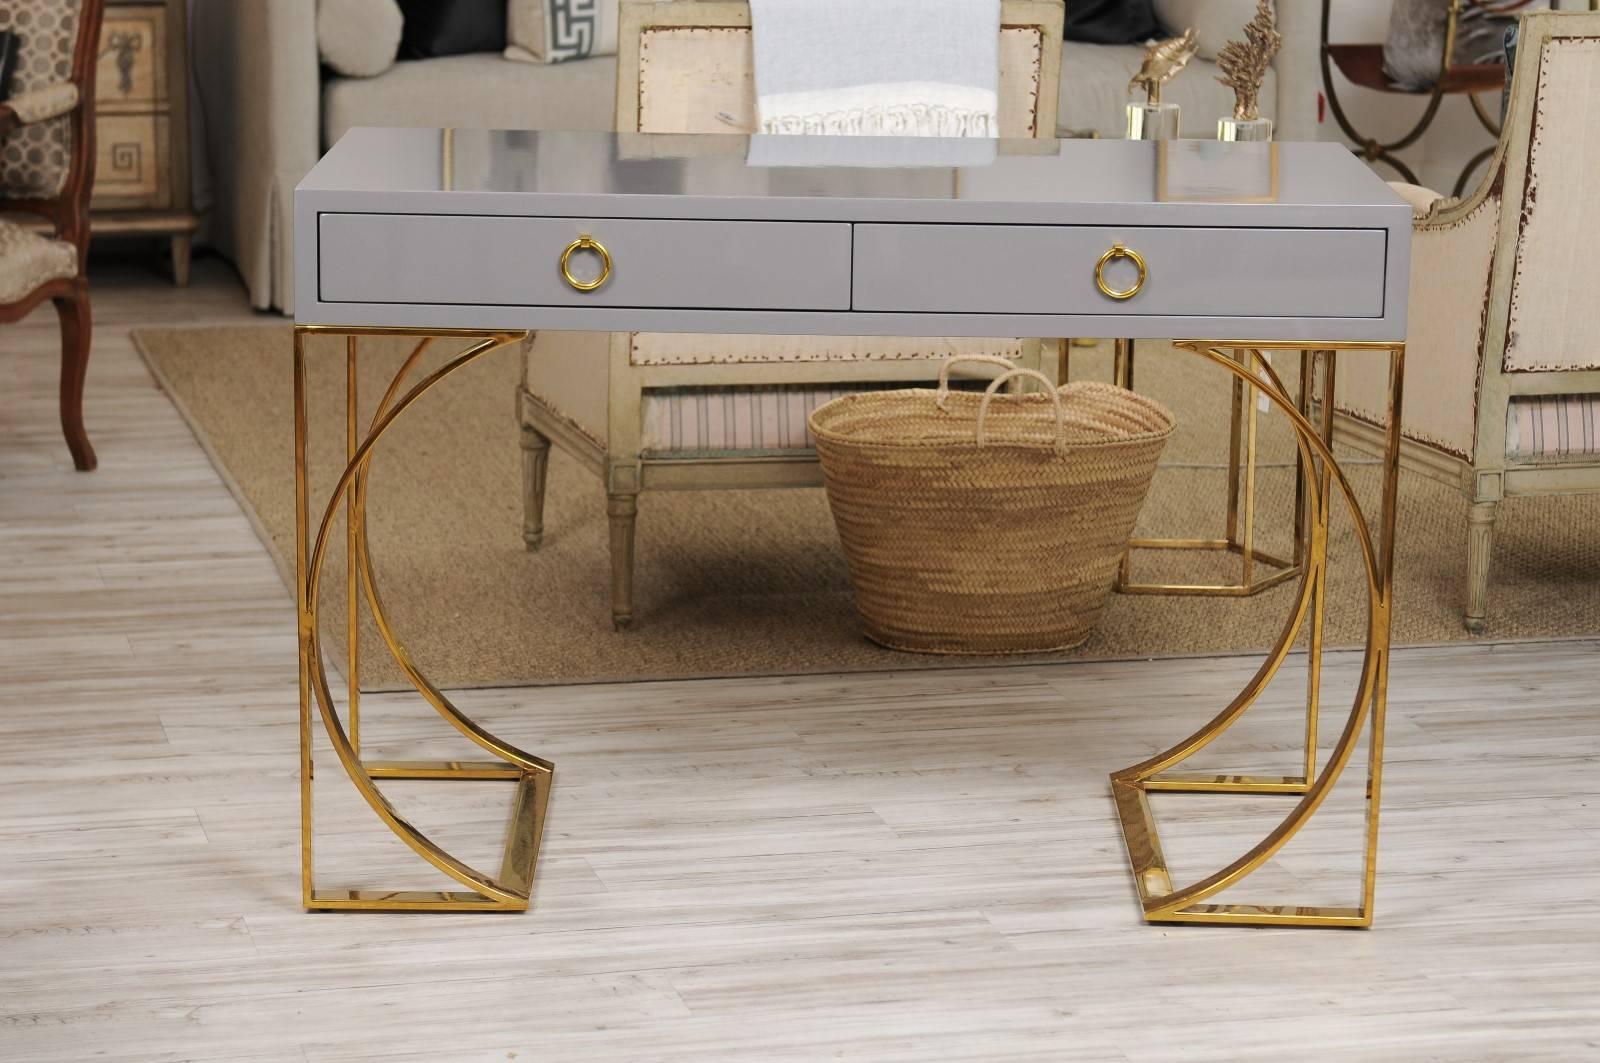 A sophisticated grey lacquer two-drawer desk with gleaming brass arched base. The ultimate combination of practical and pretty, this grey lacquer desk features abundant surface space, two roomy drawers and an eye-catching arched brass base with